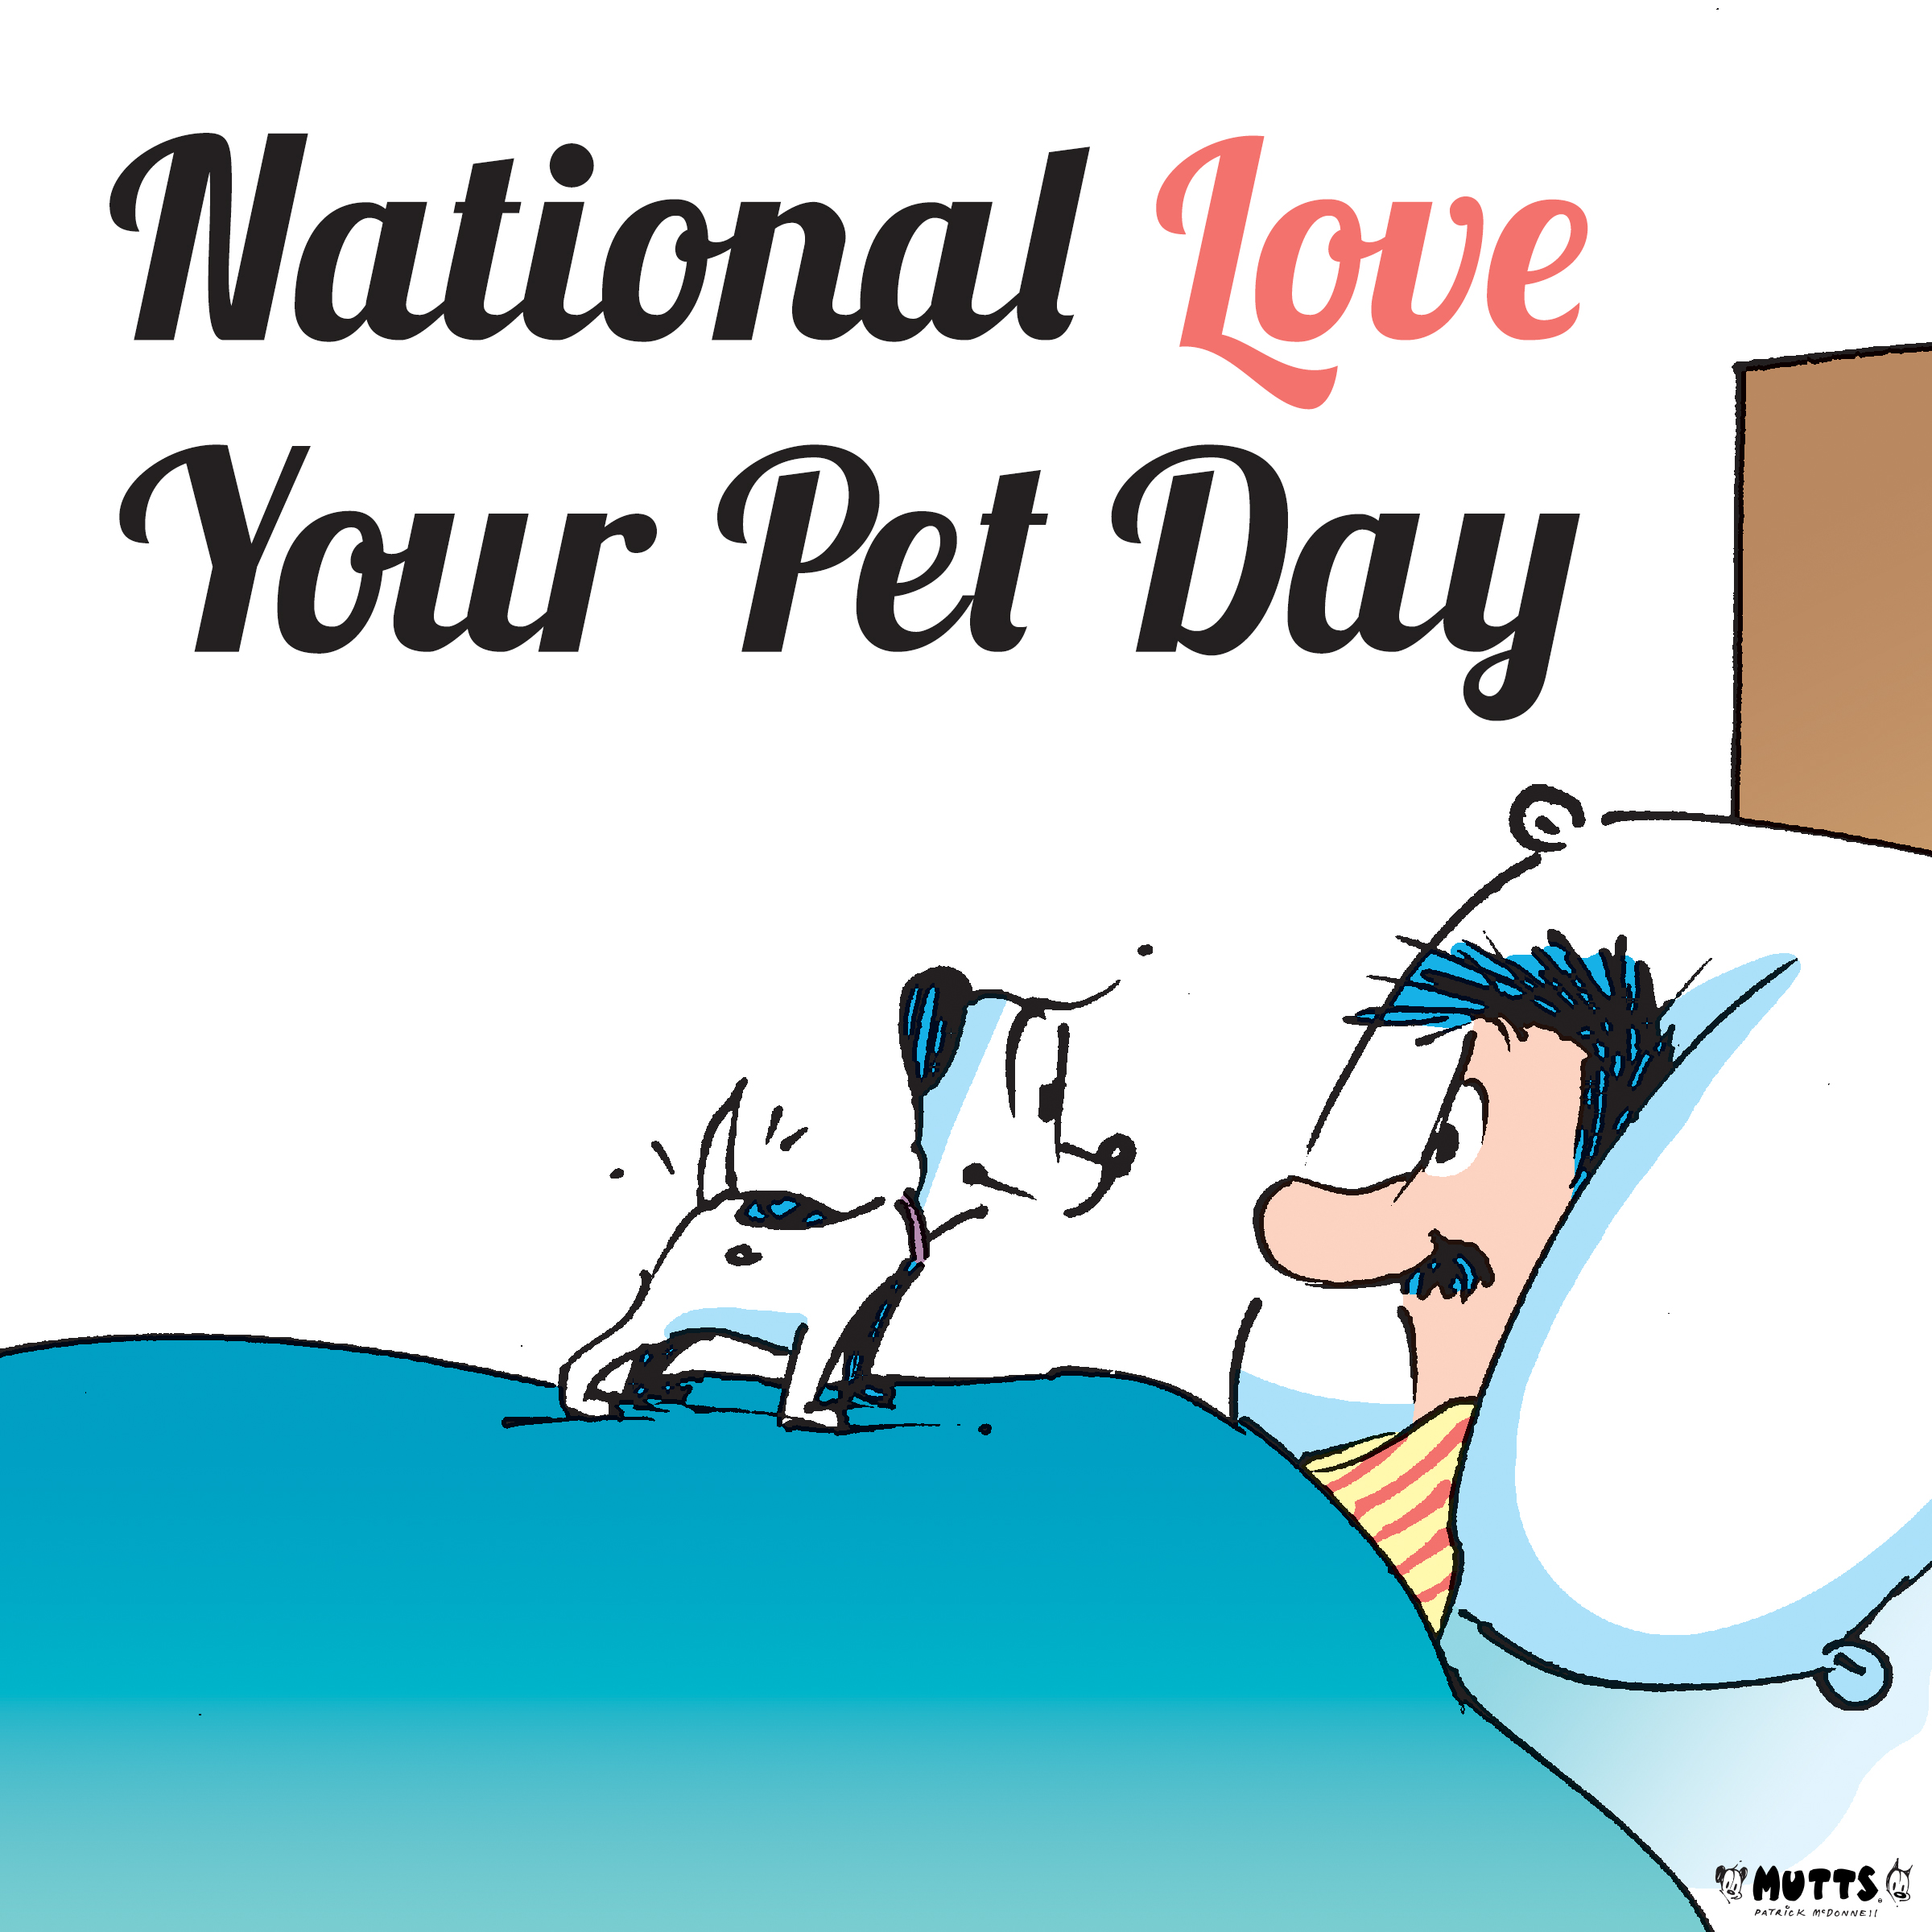 how do you celebrate national love your pet day